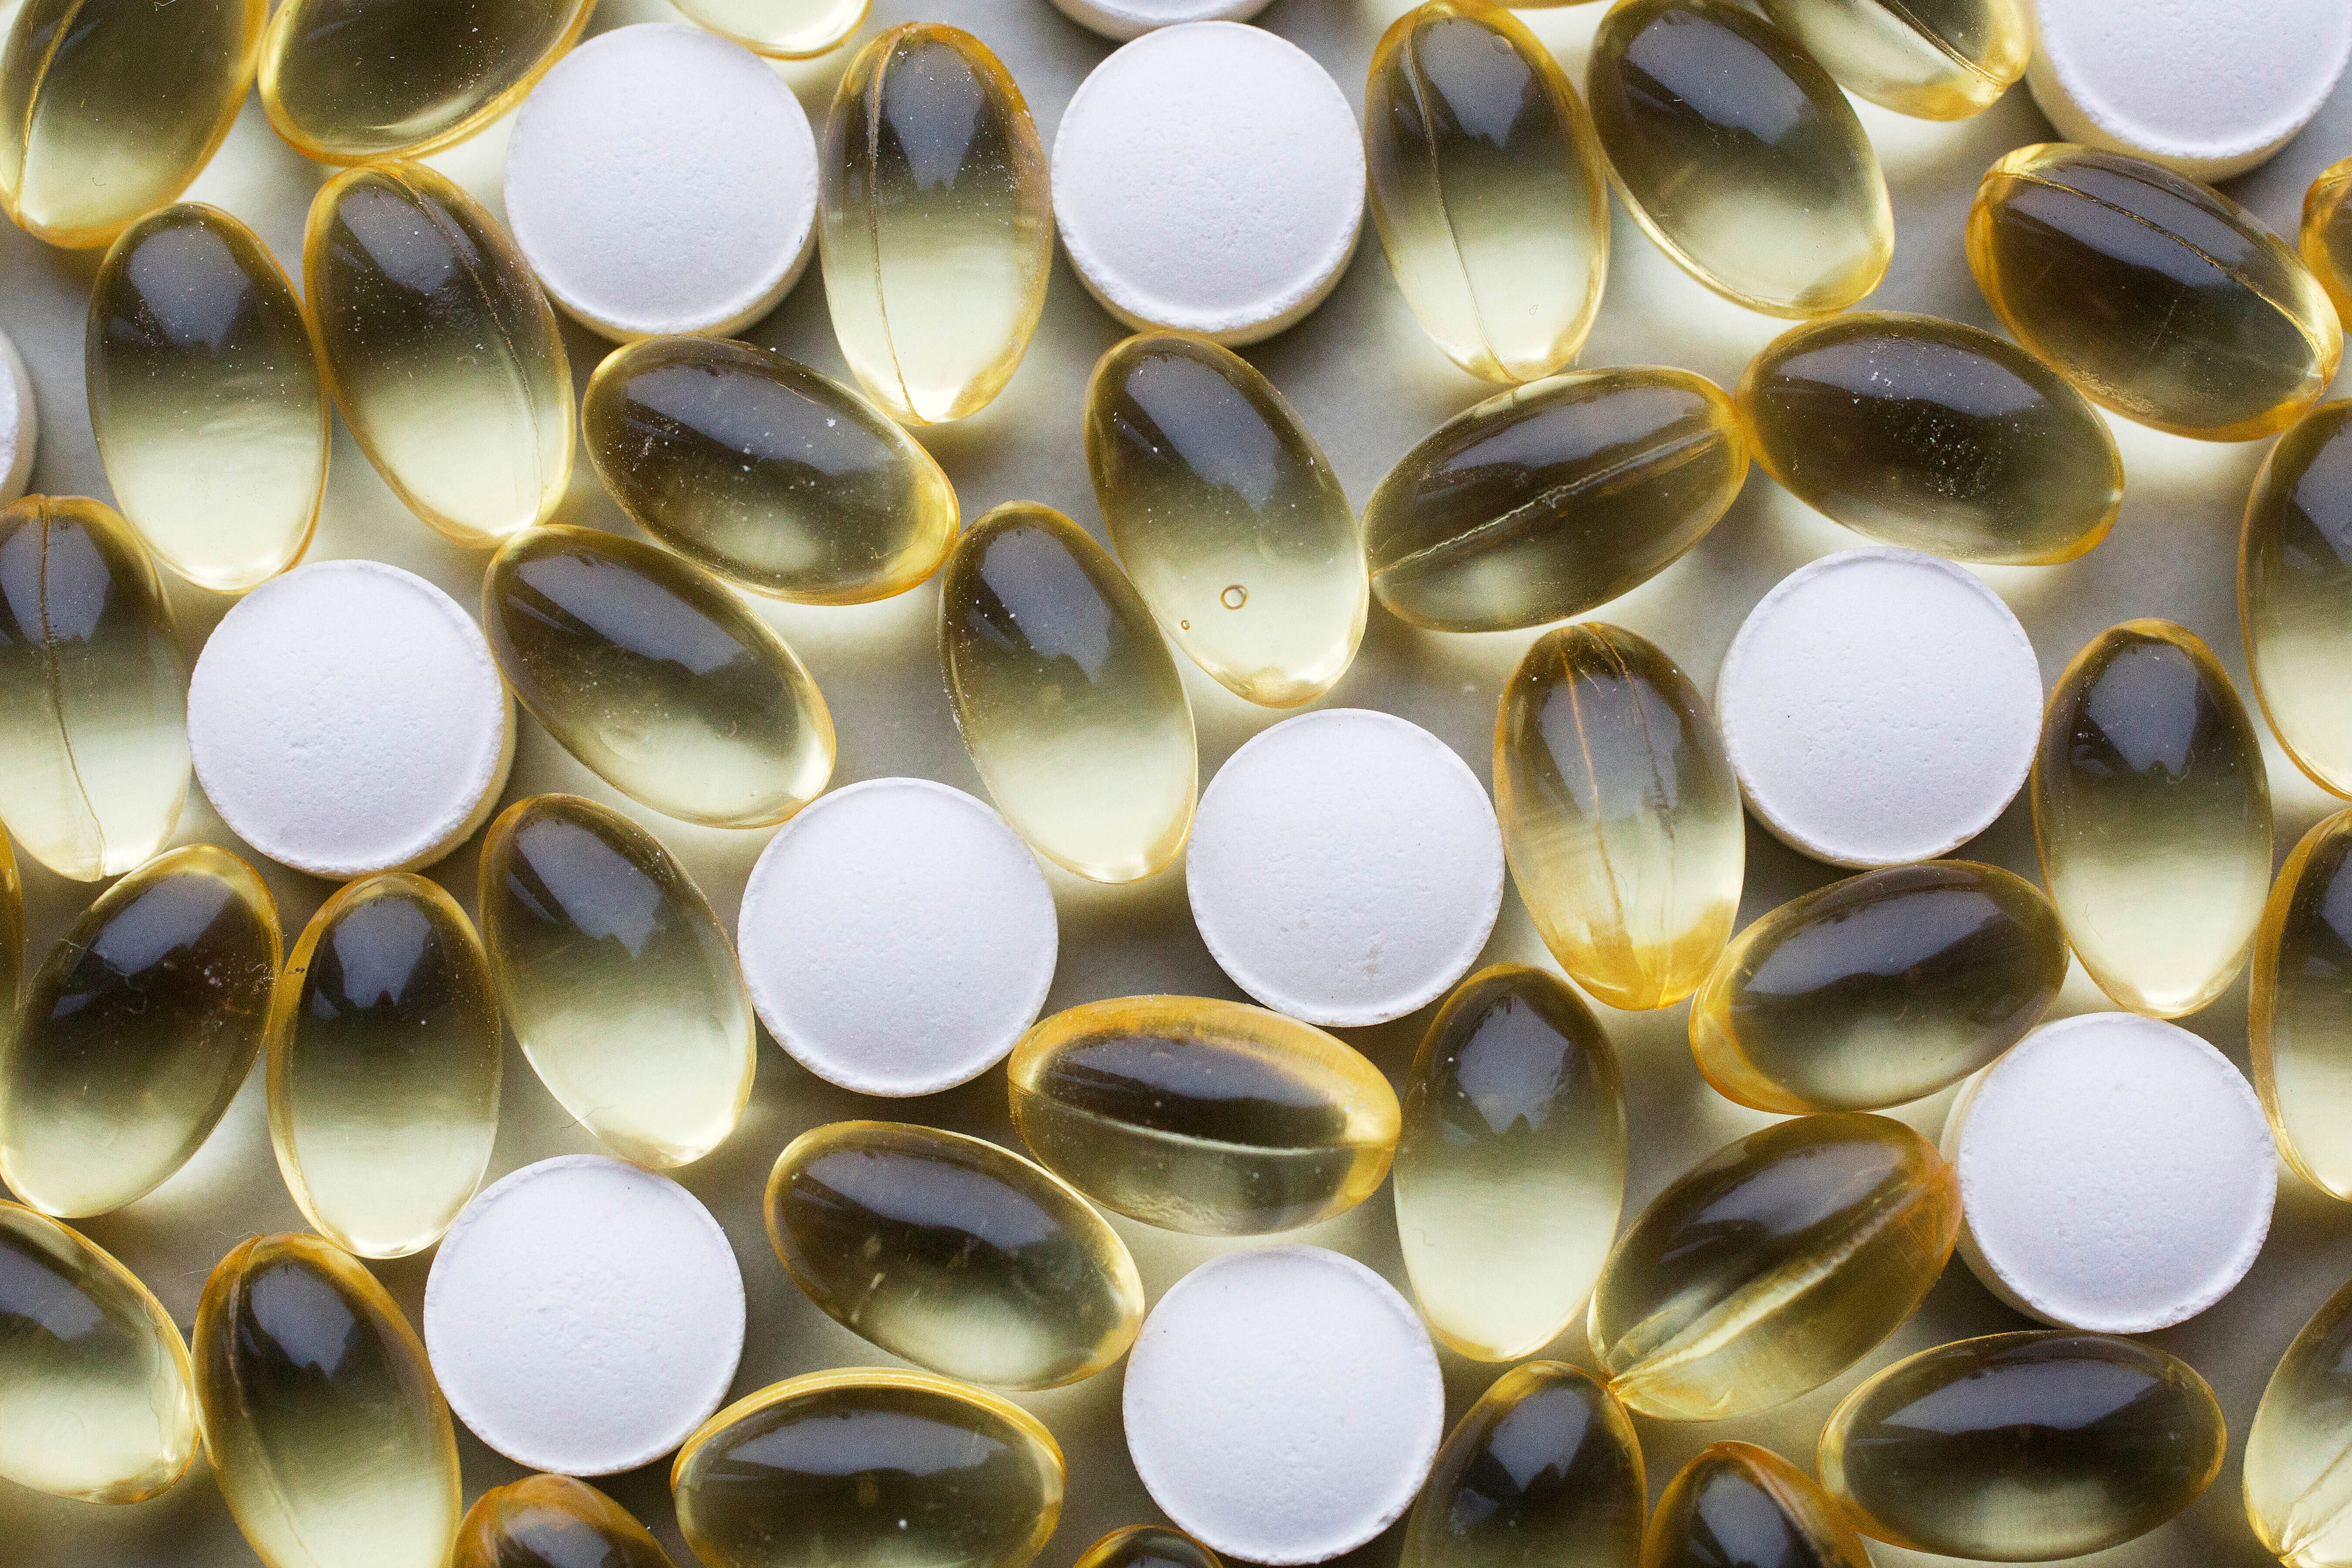 High doses of vitamin D are not as important as many think, studies show